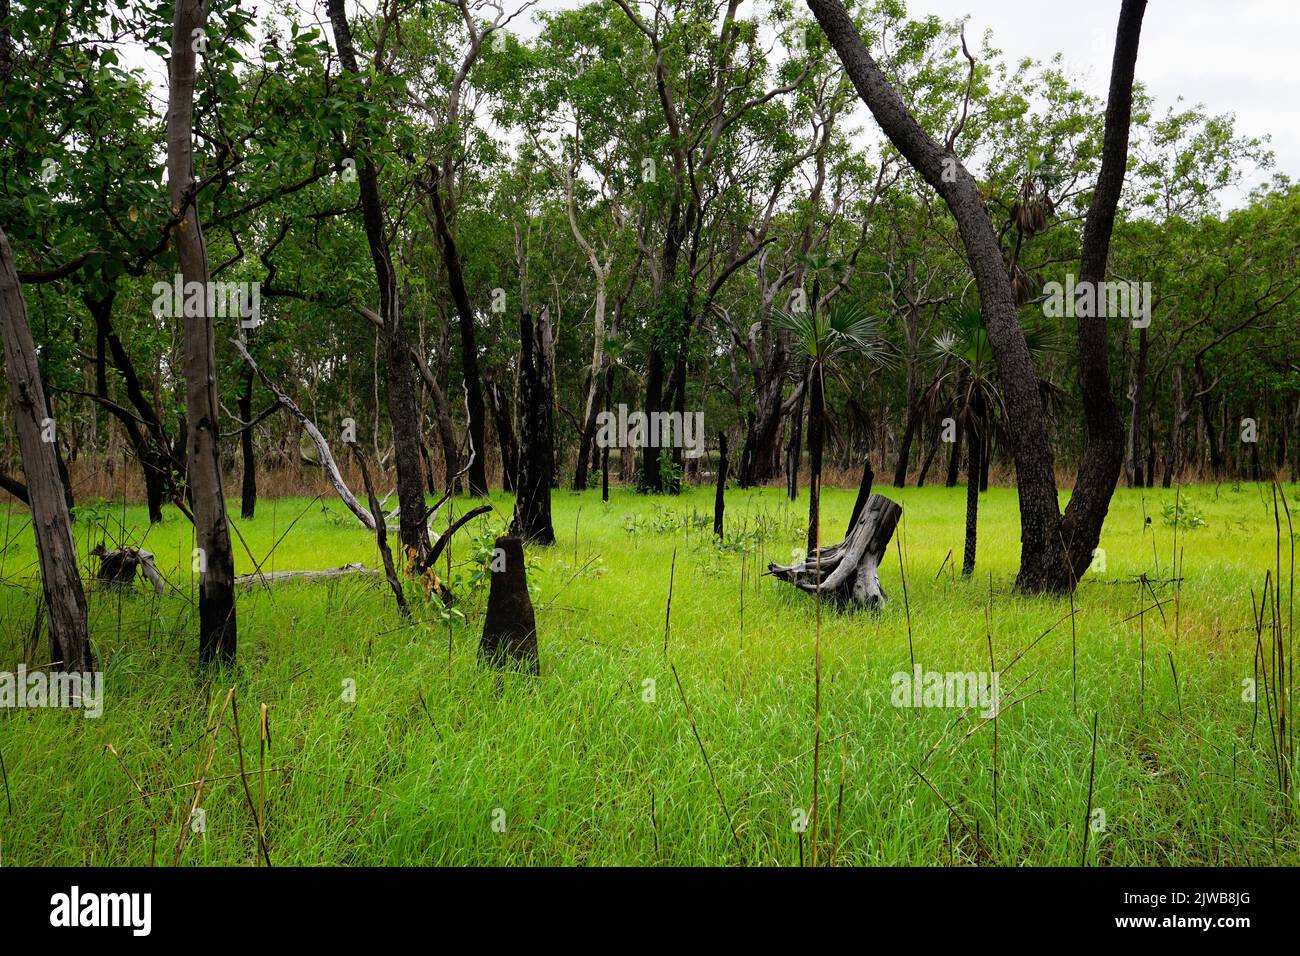 Tabletop Swamp is a small a small wetland area surrounded by paperbark trees in Litchfield National Park. Northern Territory Australia. Stock Photo